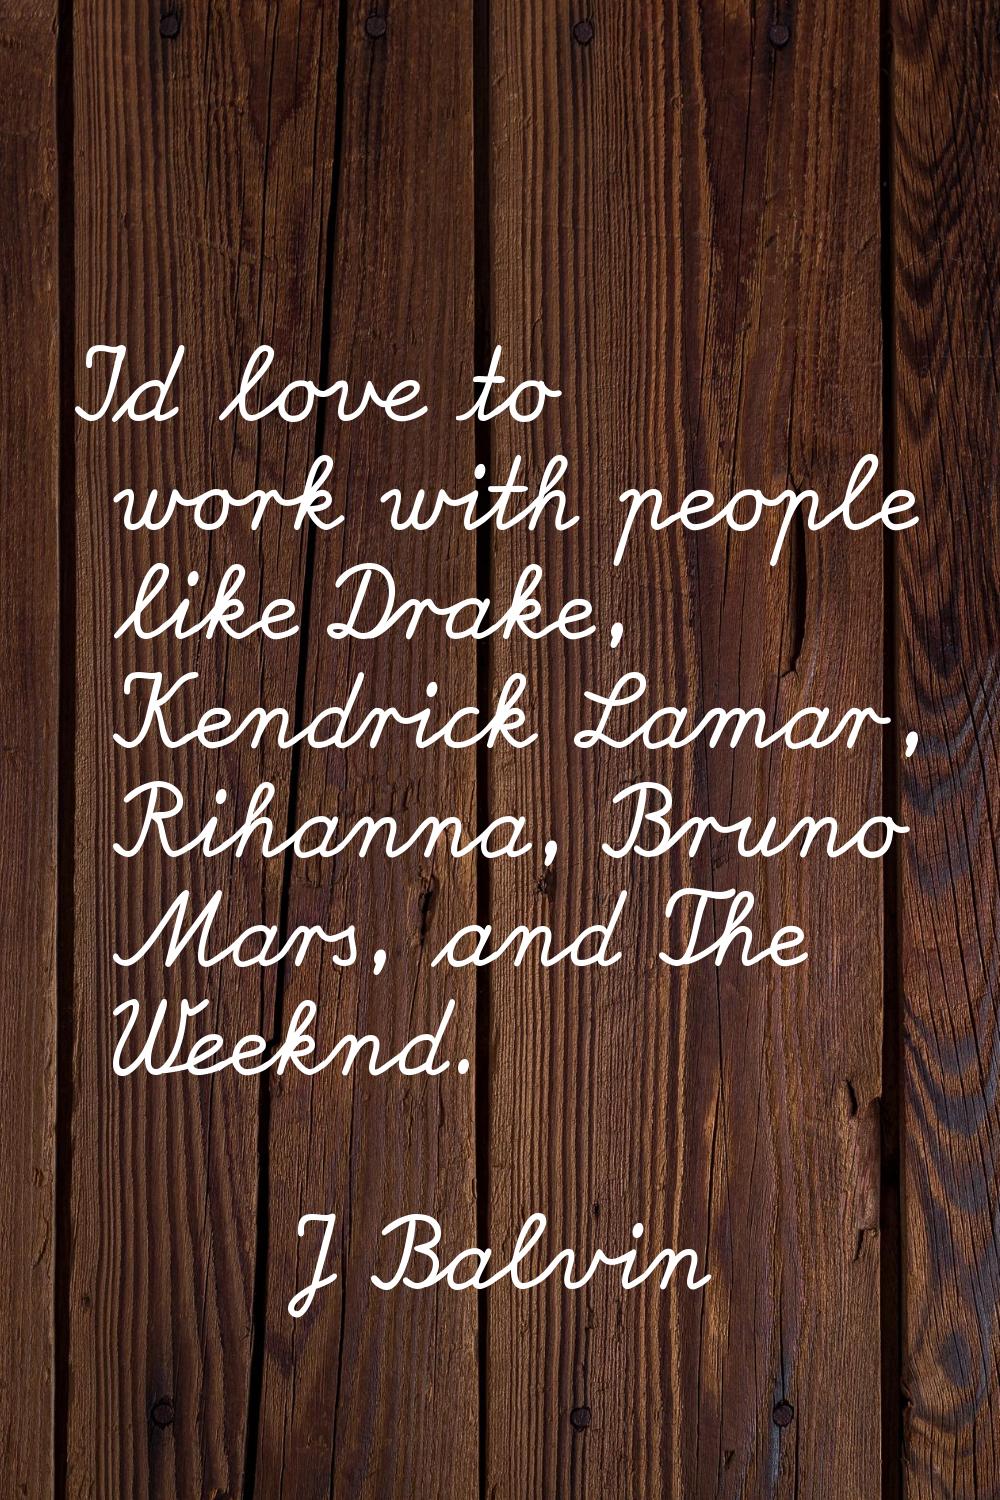 I'd love to work with people like Drake, Kendrick Lamar, Rihanna, Bruno Mars, and The Weeknd.